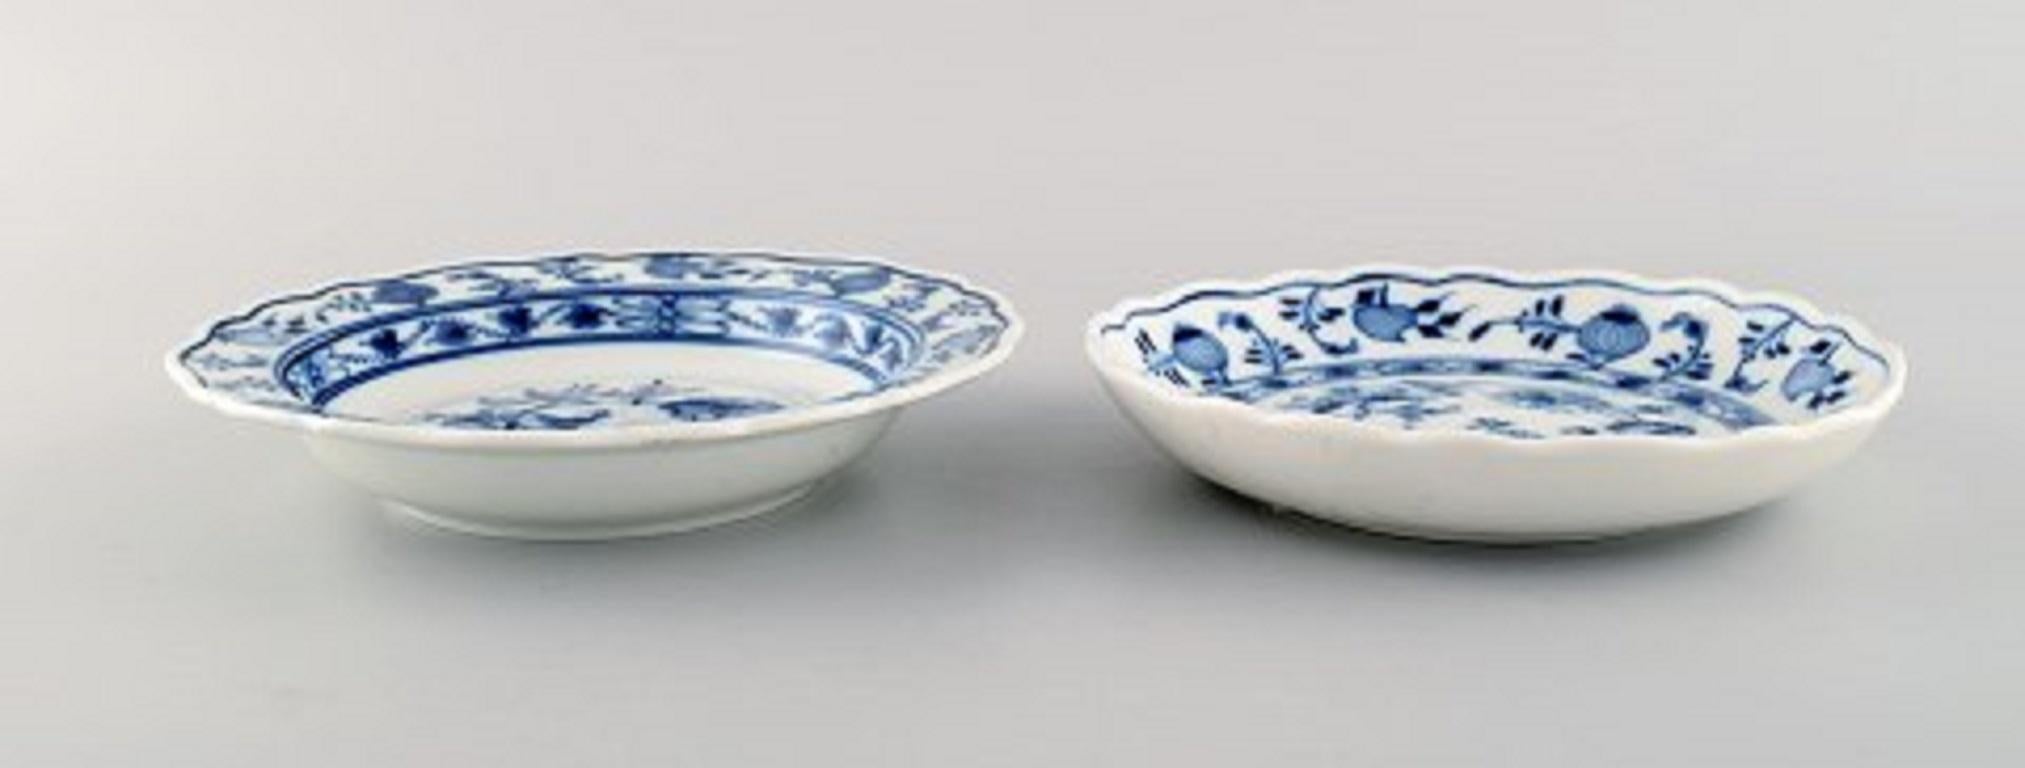 Two antique Meissen blue onion bowls in hand painted porcelain, early 20th century.
Largest measures: 17.5 x 3.3 cm.
Stamped.
In excellent condition.
2nd factory quality.

The Meissen 